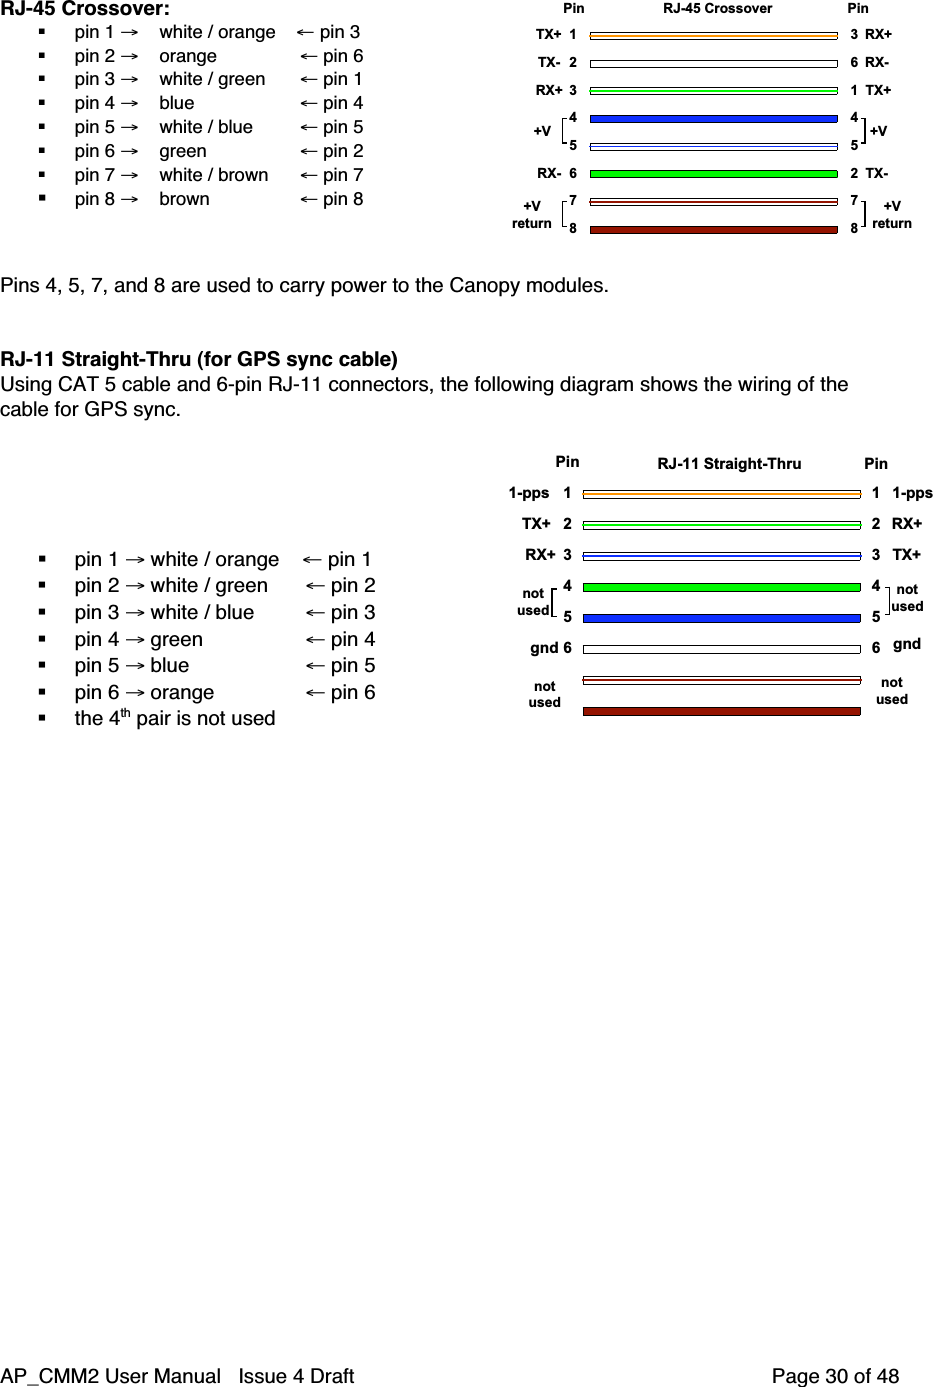 AP_CMM2 User Manual   Issue 4 Draft         Page 30 of 48RJ-45 Crossover: pin 1 →    white / orange    ← pin 3 pin 2 →    orange      ← pin 6 pin 3 →    white / green  ← pin 1 pin 4 →    blue ← pin 4 pin 5 →    white / blue ← pin 5 pin 6 →    green      ← pin 2 pin 7 →    white / brown ← pin 7 pin 8 →    brown      ← pin 878TX+TX-RX+RX-36145278RX+RX-TX+TX-123456+Vreturn+V +V+VreturnPin PinRJ-45 CrossoverPins 4, 5, 7, and 8 are used to carry power to the Canopy modules.RJ-11 Straight-Thru (for GPS sync cable)Using CAT 5 cable and 6-pin RJ-11 connectors, the following diagram shows the wiring of thecable for GPS sync. pin 1 → white / orange    ← pin 1 pin 2 → white / green  ← pin 2 pin 3 → white / blue  ← pin 3 pin 4 → green  ← pin 4 pin 5 → blue  ← pin 5 pin 6 → orange    ← pin 6 the 4th pair is not used1234561234561-ppsTX+RX+gnd1-ppsRX+TX+gndnotusednotusednotusednotusedPin PinRJ-11 Straight-Thru